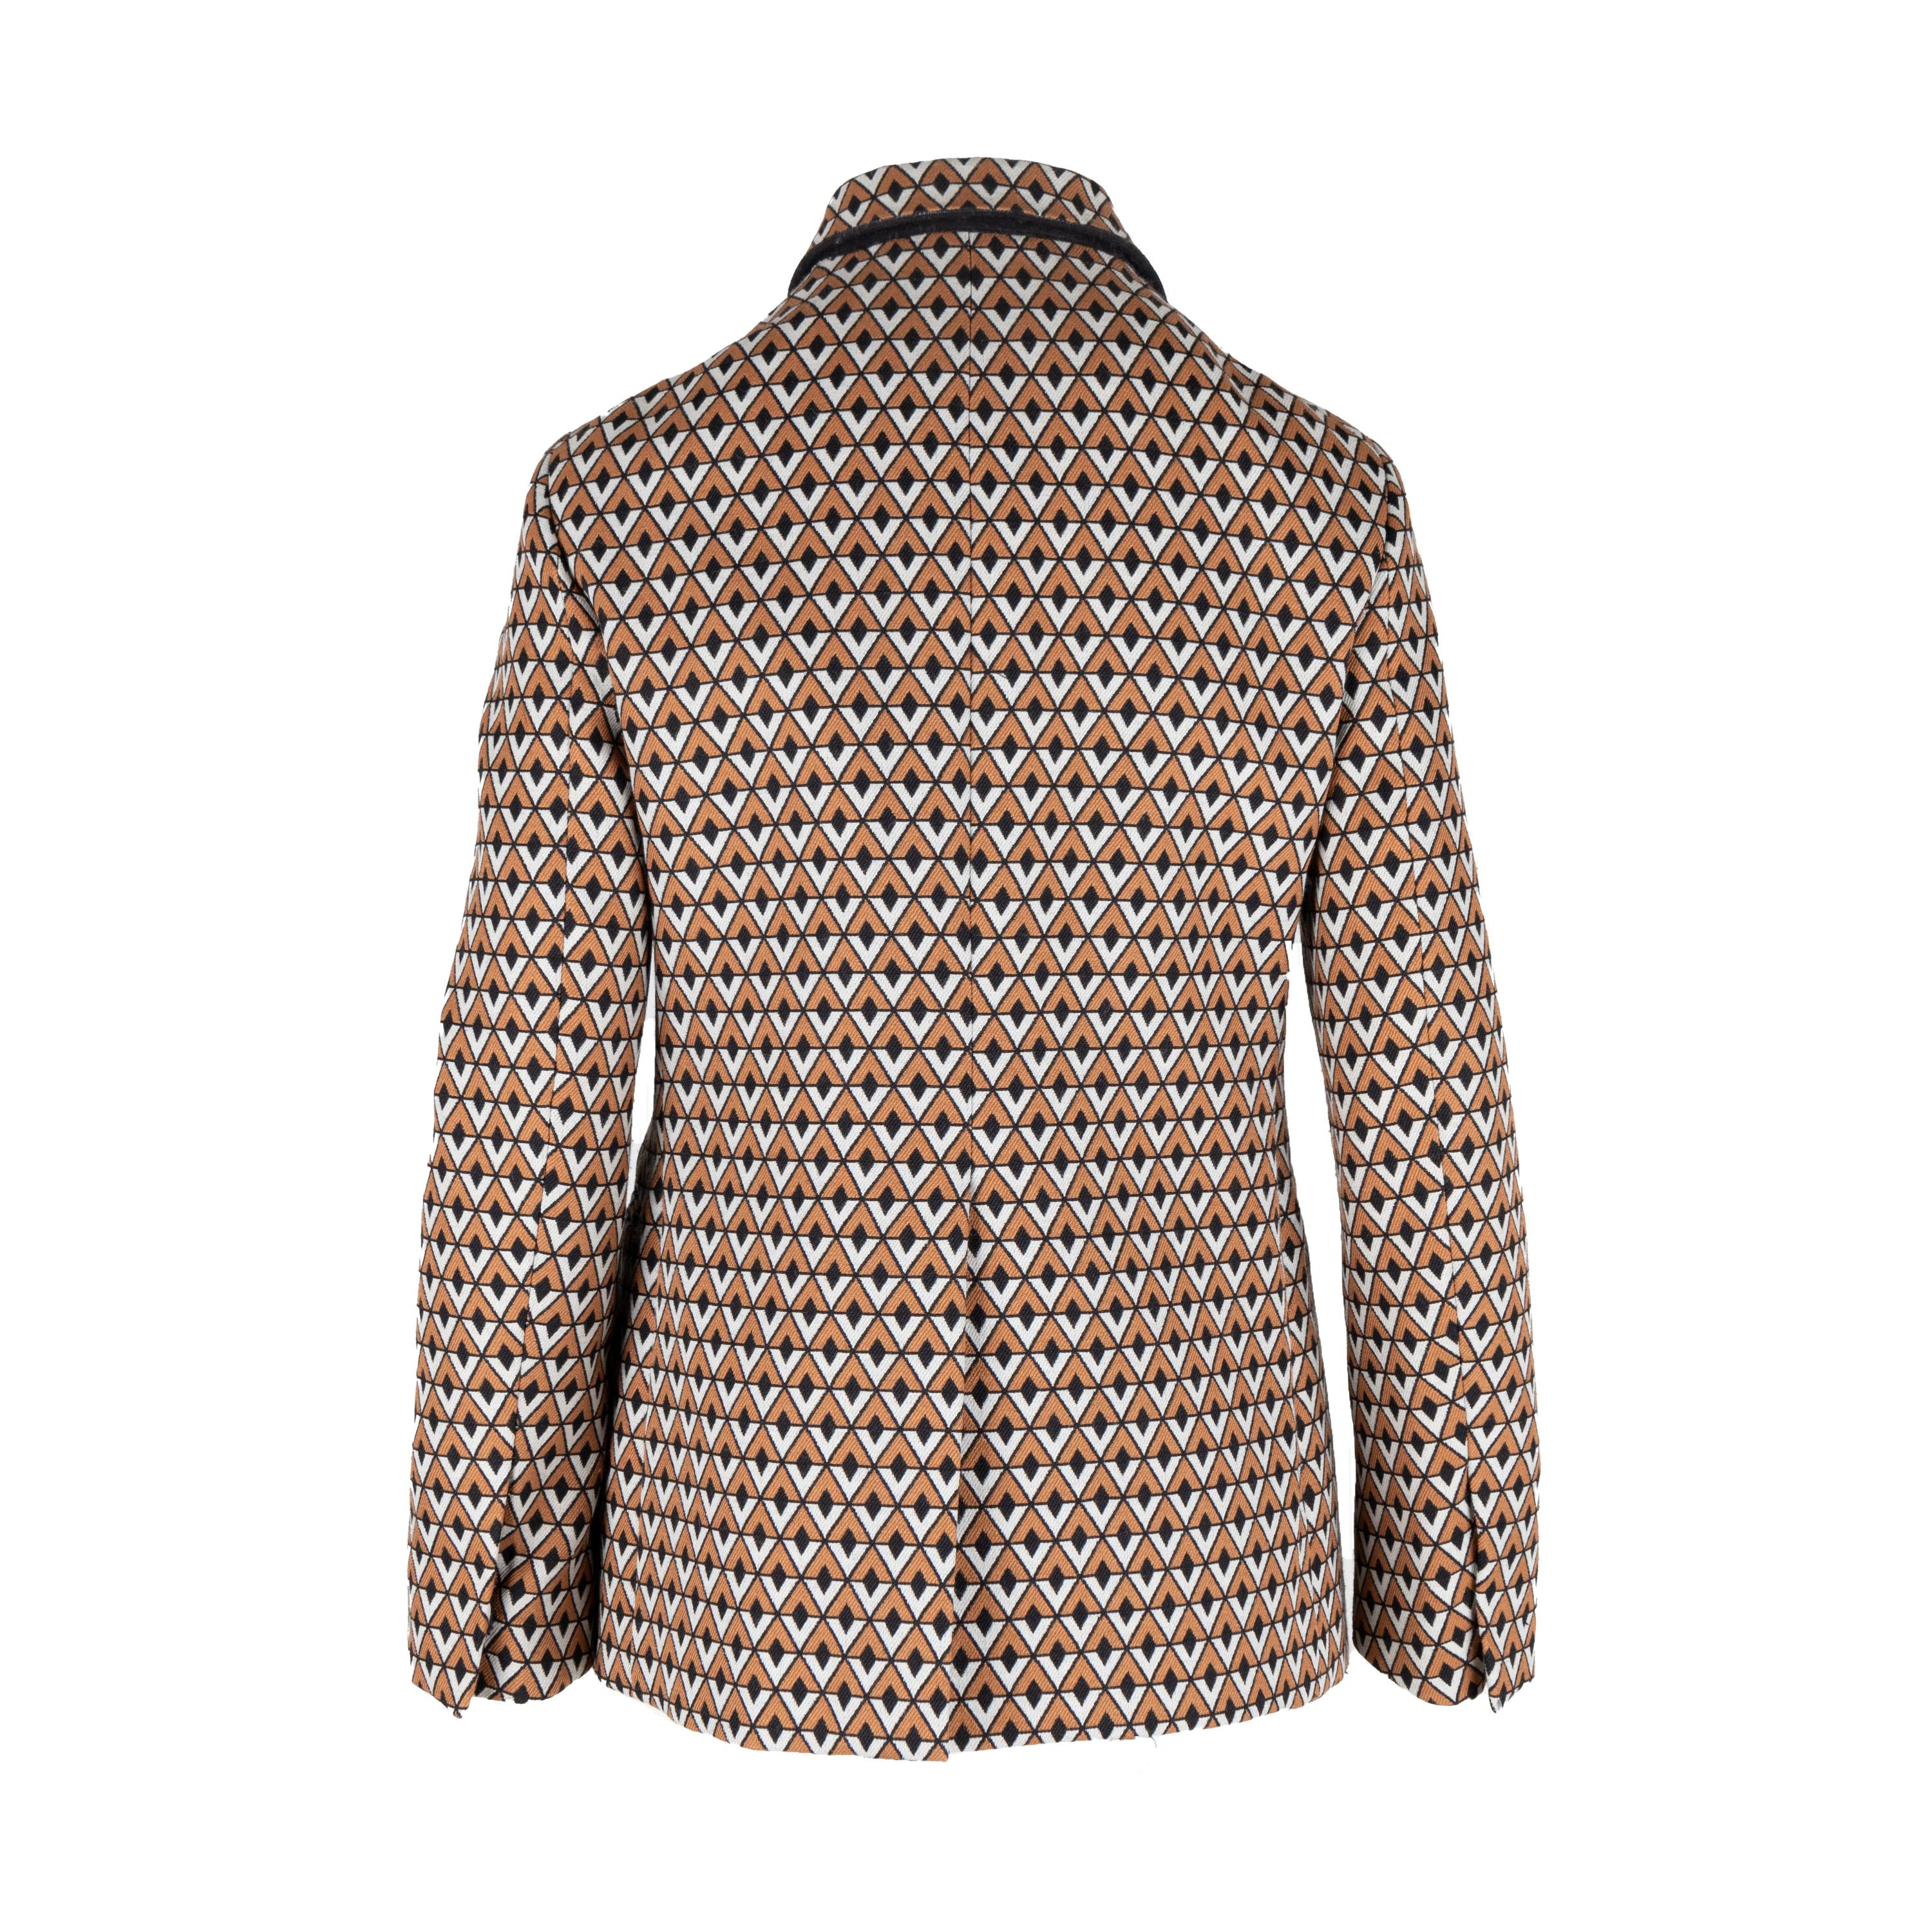 Prada Geometric Print Double Breasted Jacket In Excellent Condition For Sale In Milano, IT